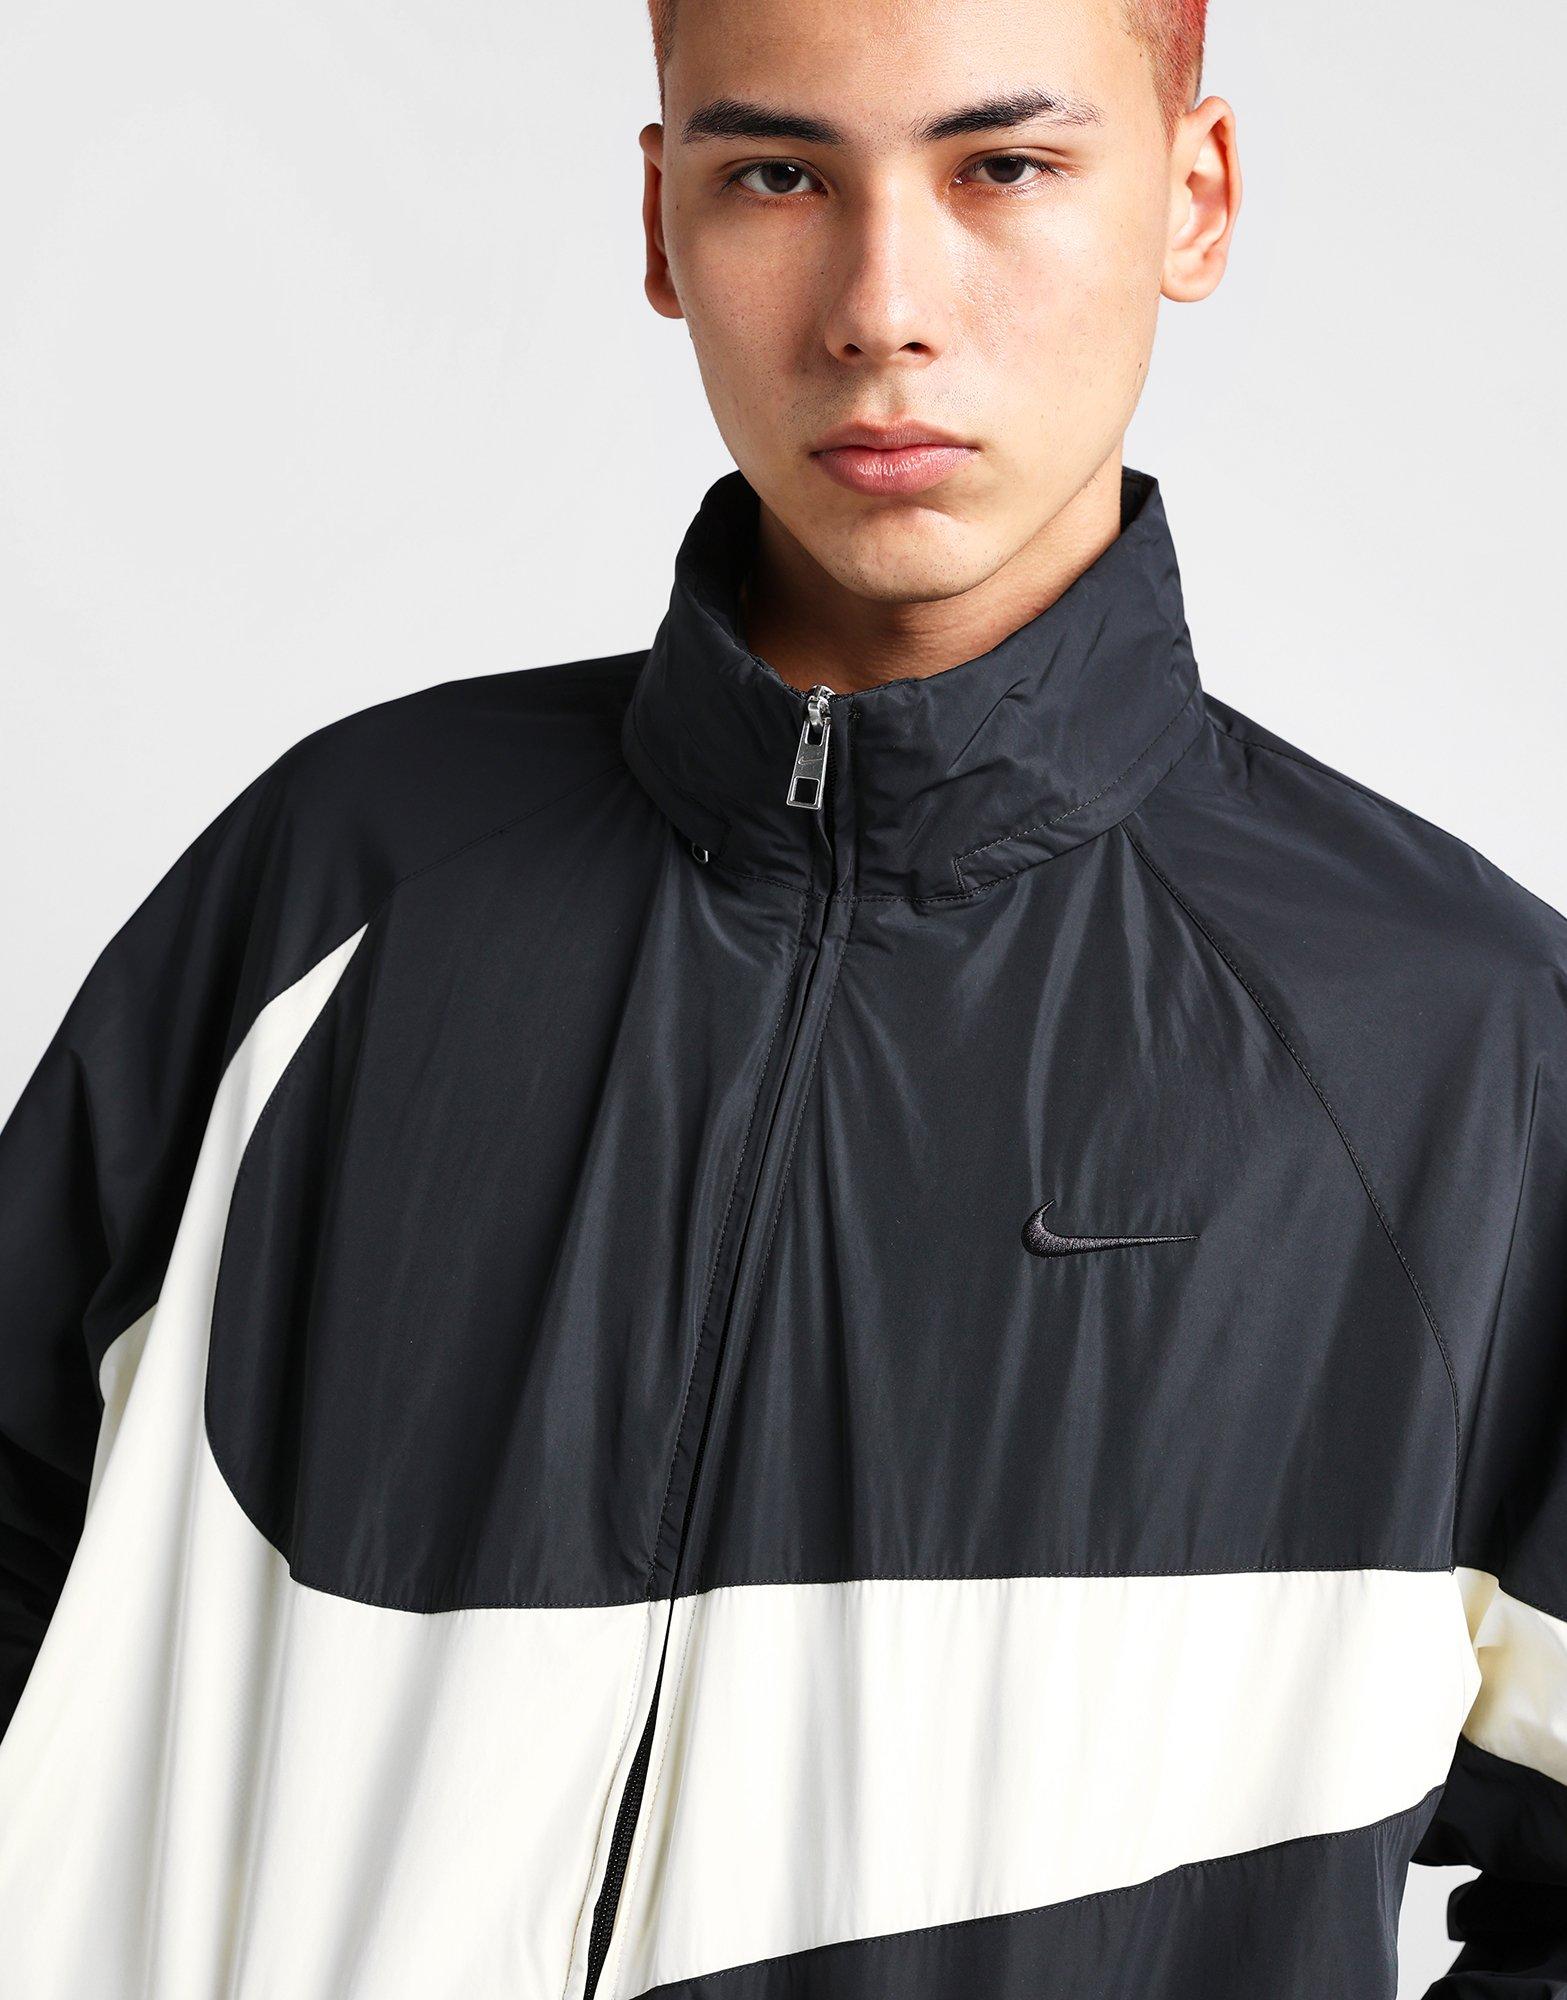 Nike Swoosh Woven jacket in black and cream